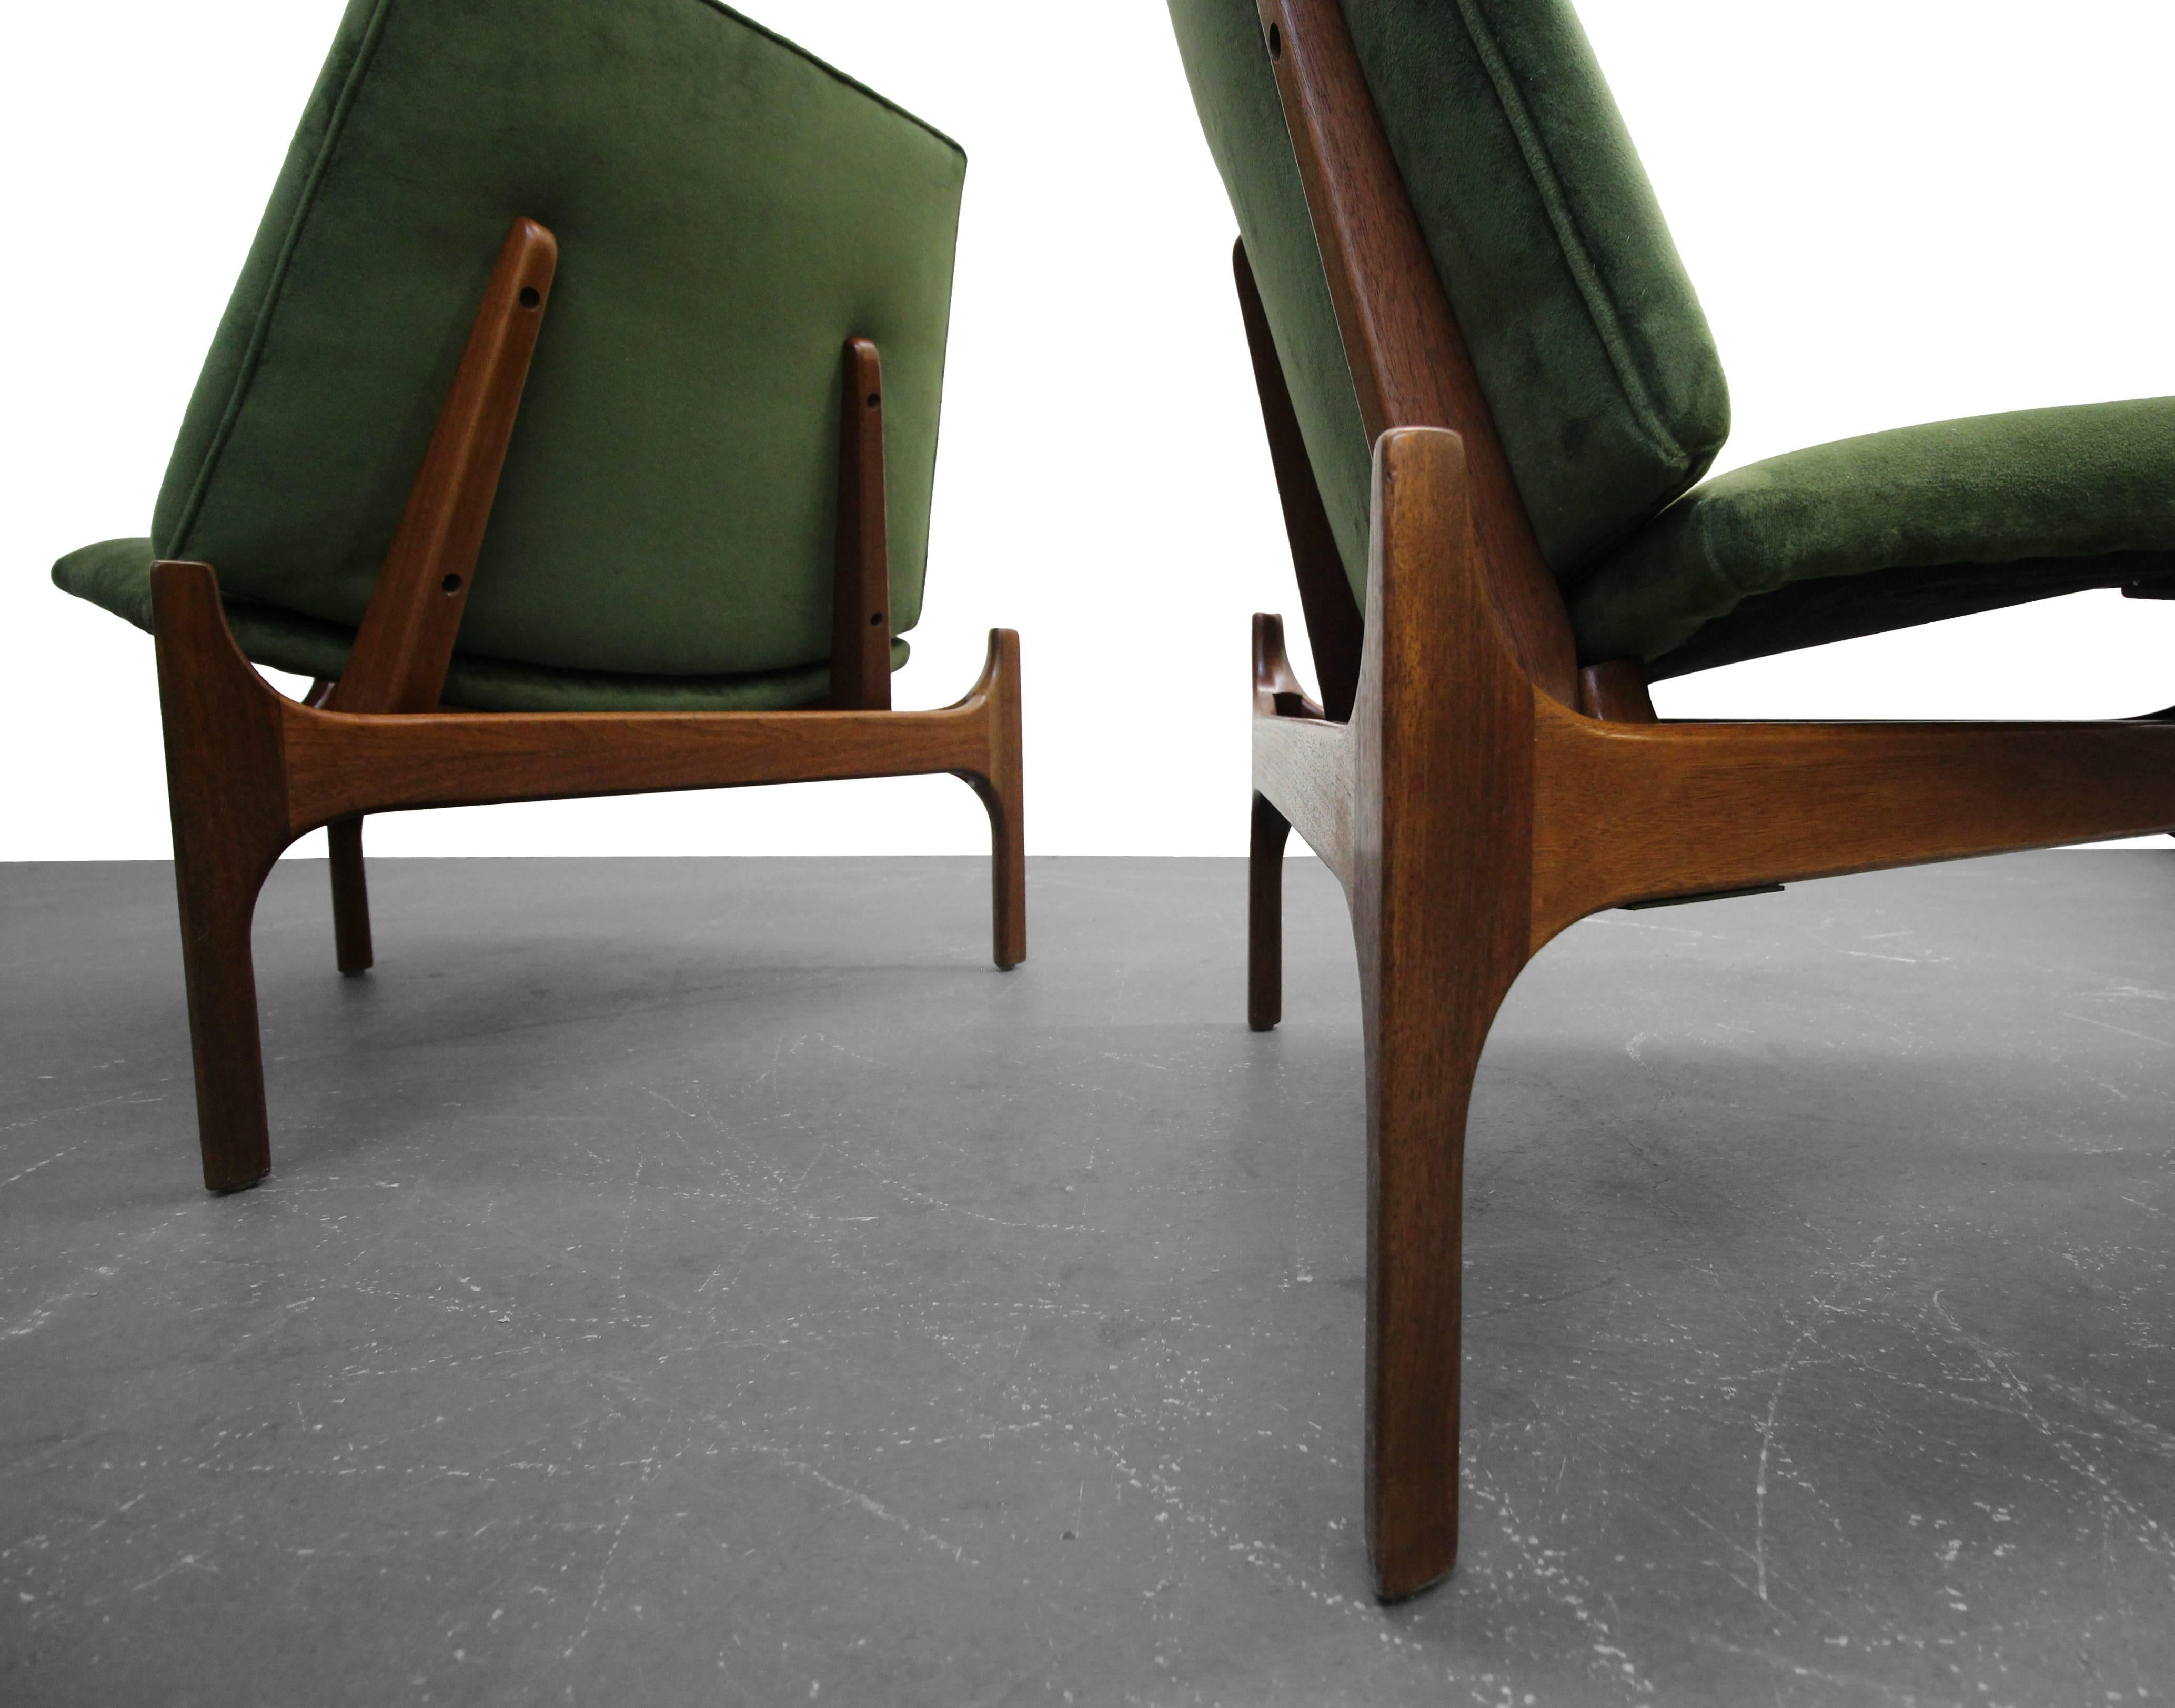 20th Century Pair of Midcentury Sculptural Lounge Chairs by John Caldwell for Brown Saltman